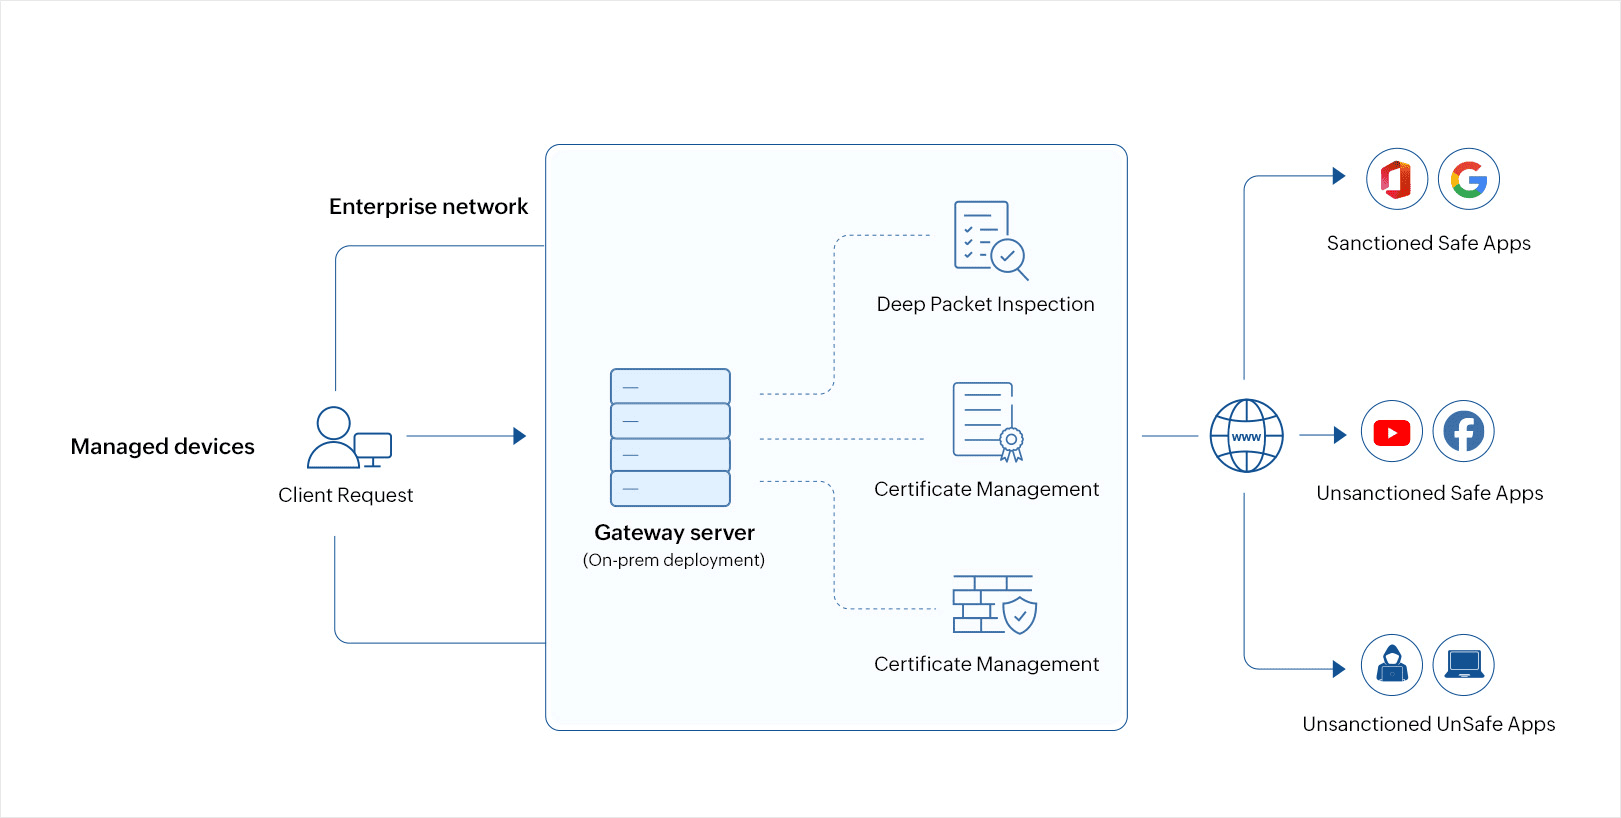 Forward proxy architecture diagram: The gateway server, configured on premises on the client's side intercepts outbound traffic, conducts DPI, manages SSL/TLS certificates, and can apply filtering or blocking mechanisms to enforce security policies and protect sensitive data